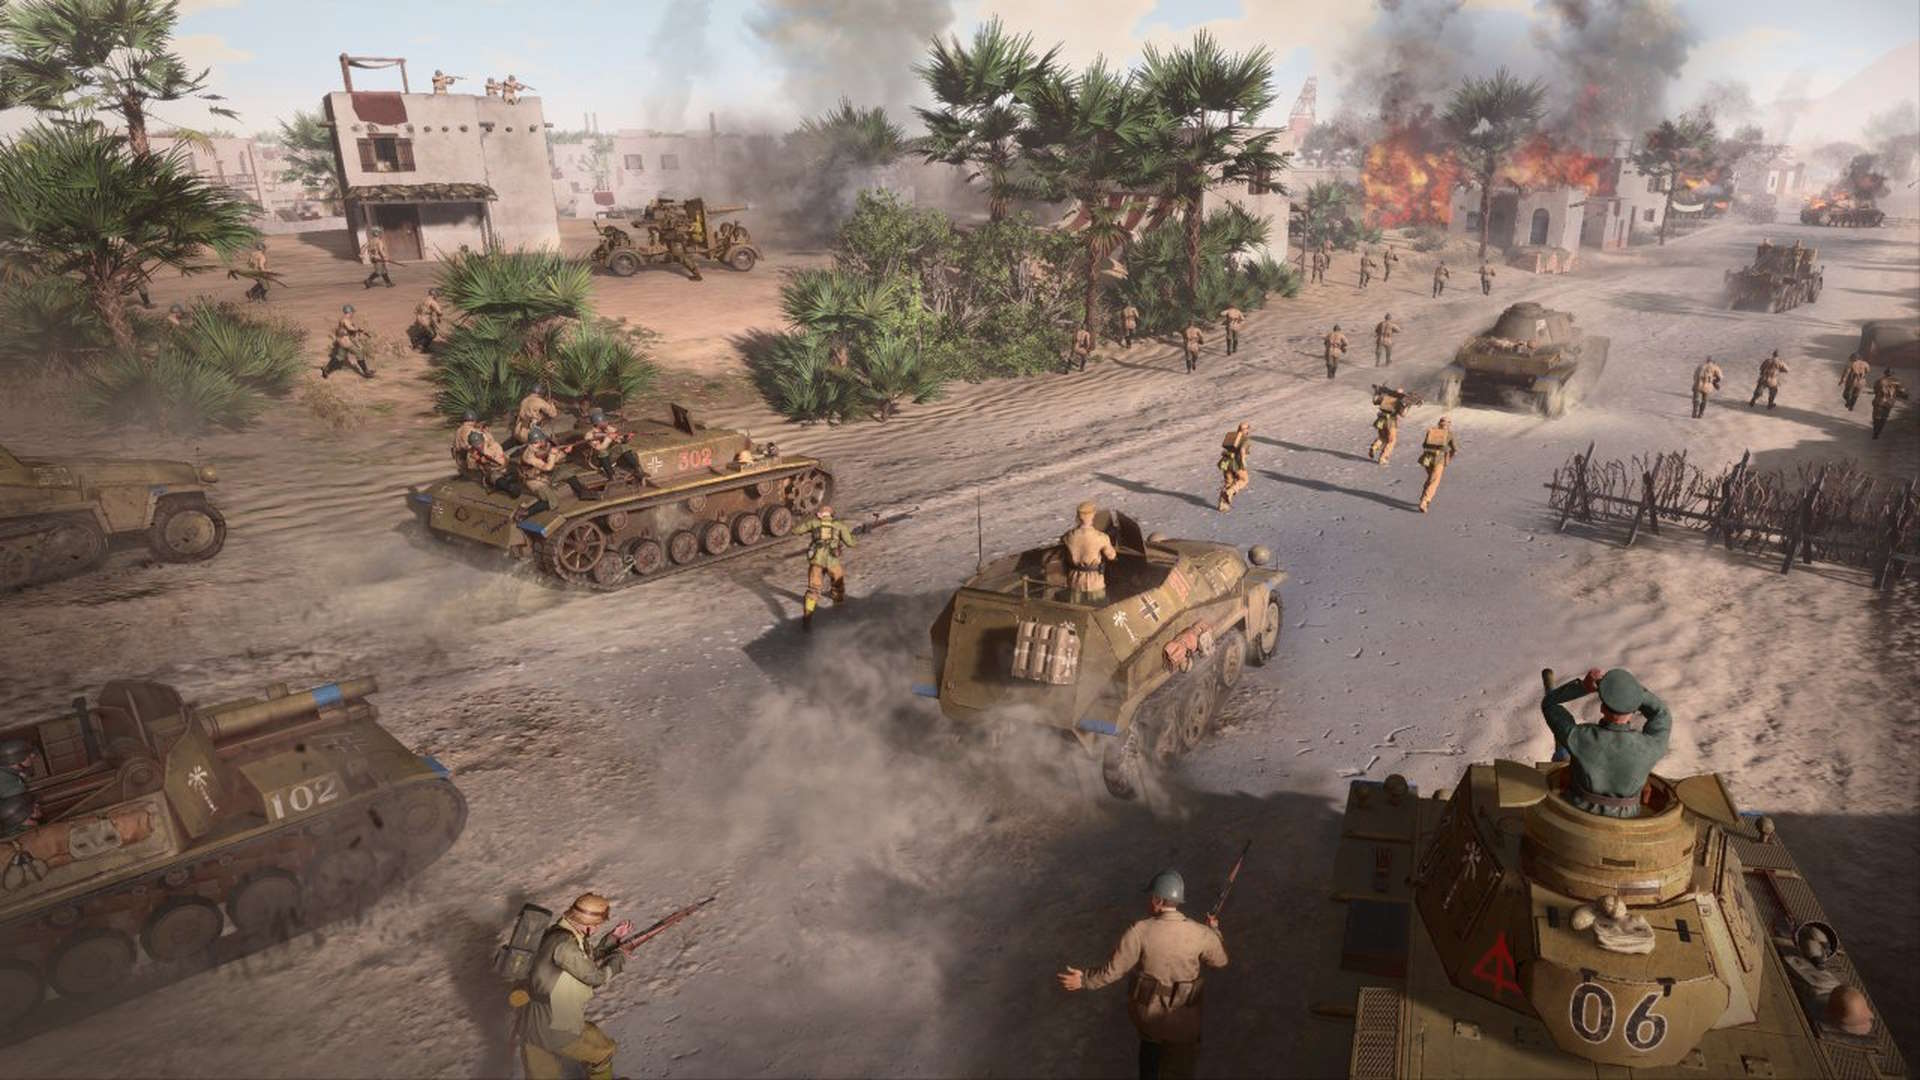 Company of Heroes 3 is an RTS evolved